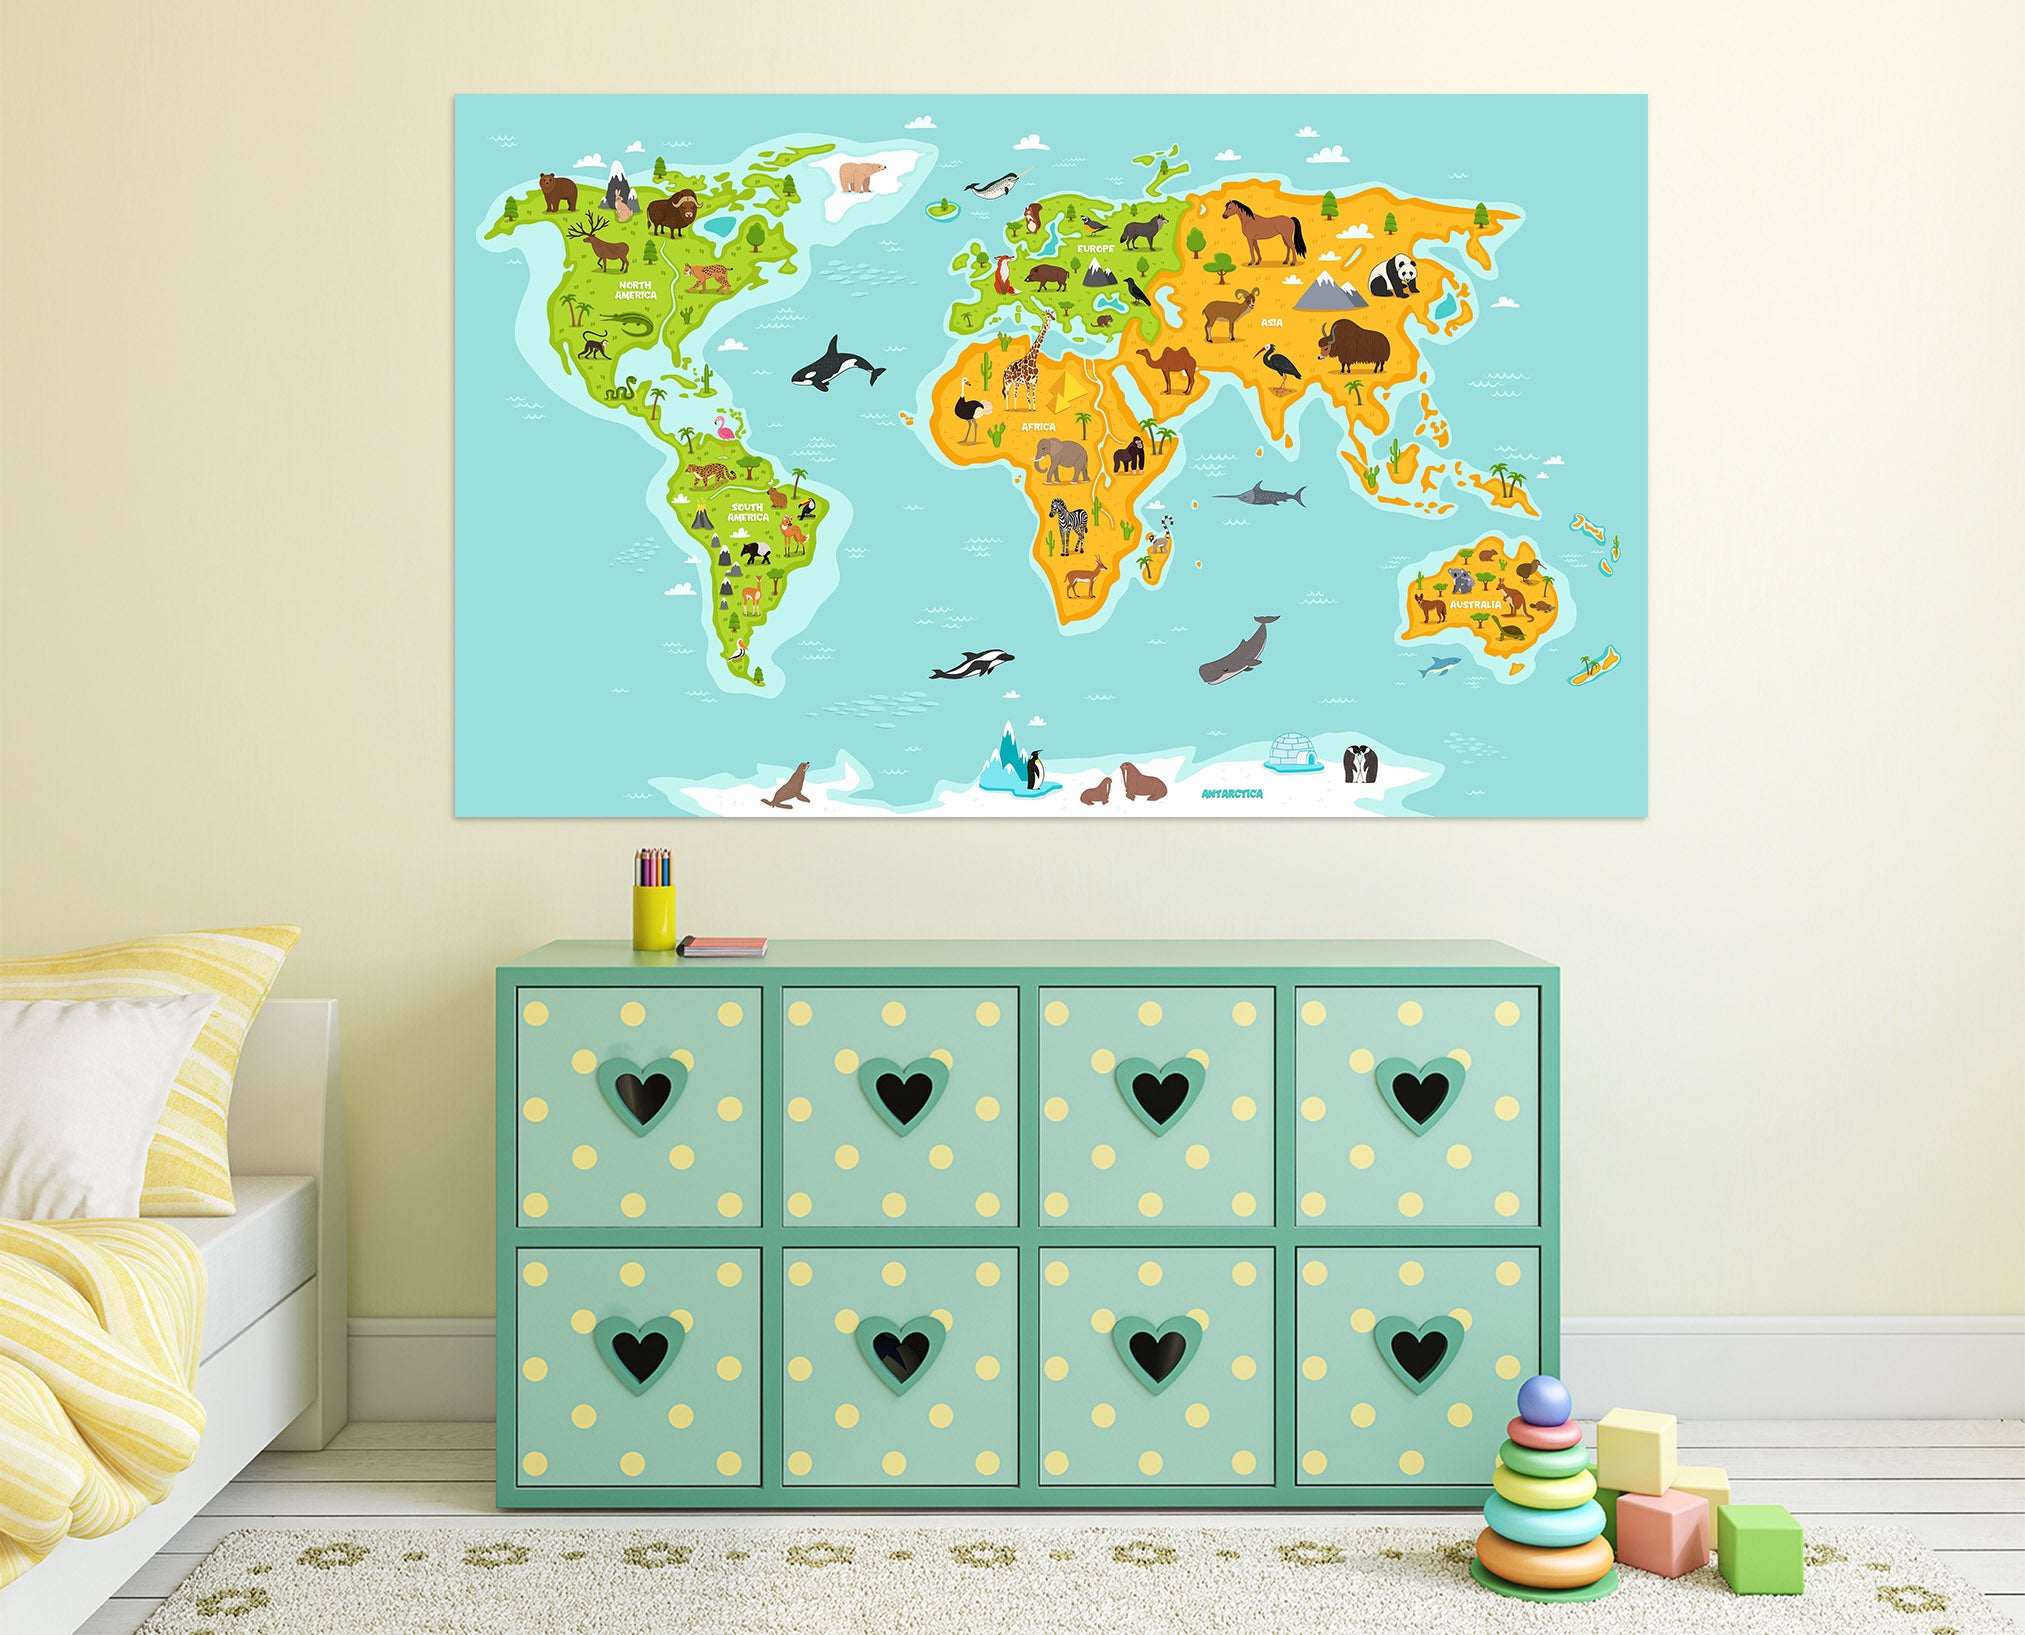 3D Colored Land 292 World Map Wall Sticker